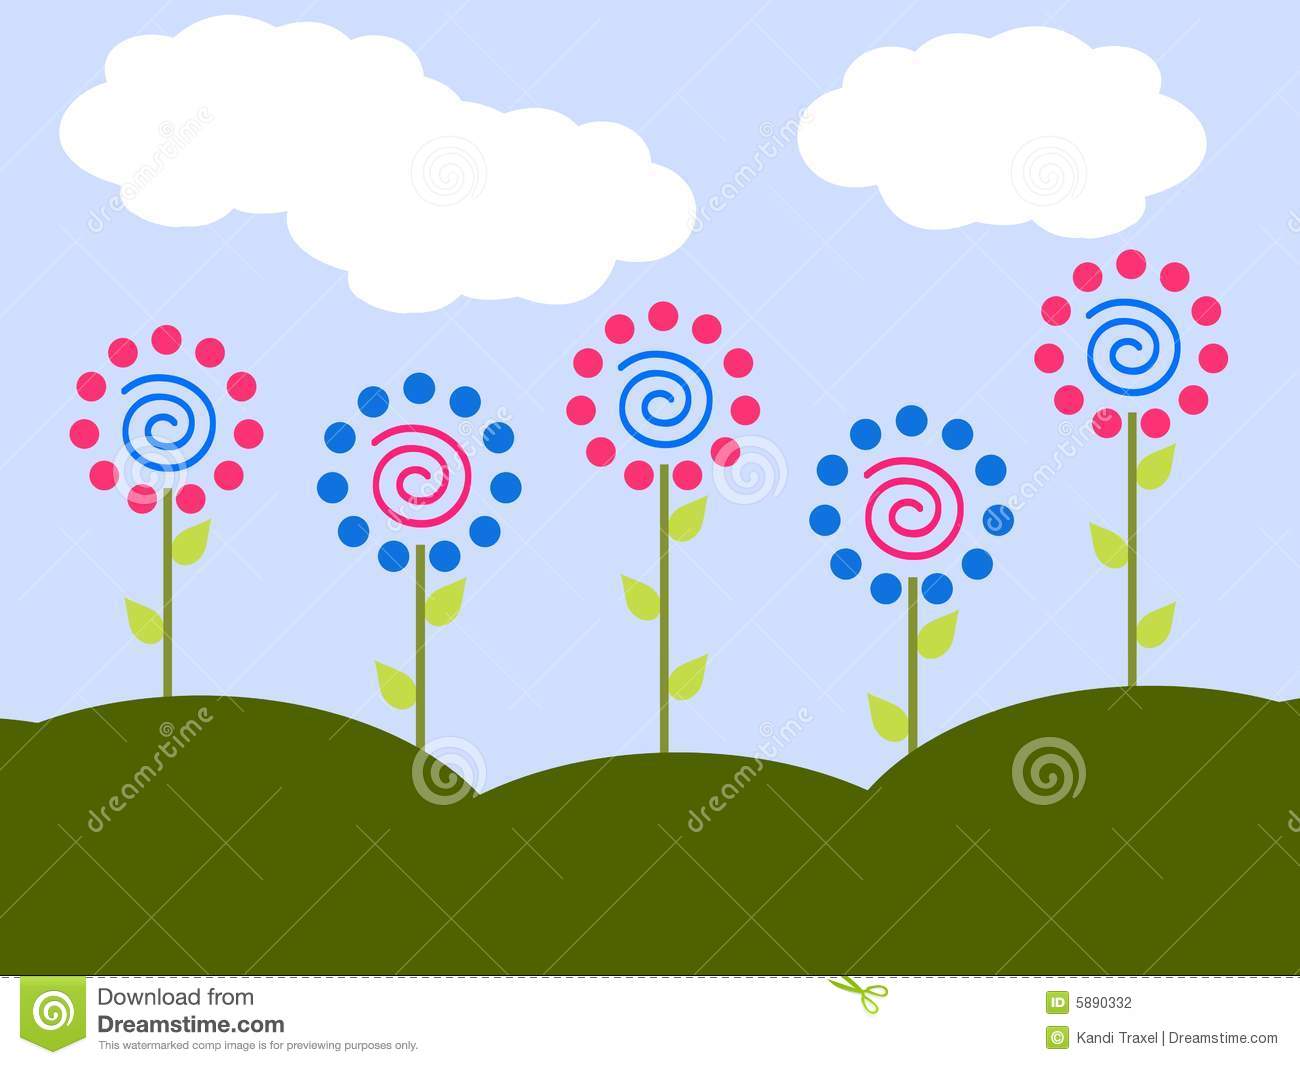 Row Of Flowers With Pink And Blue Polka Dot Petals And A Swirl Center    